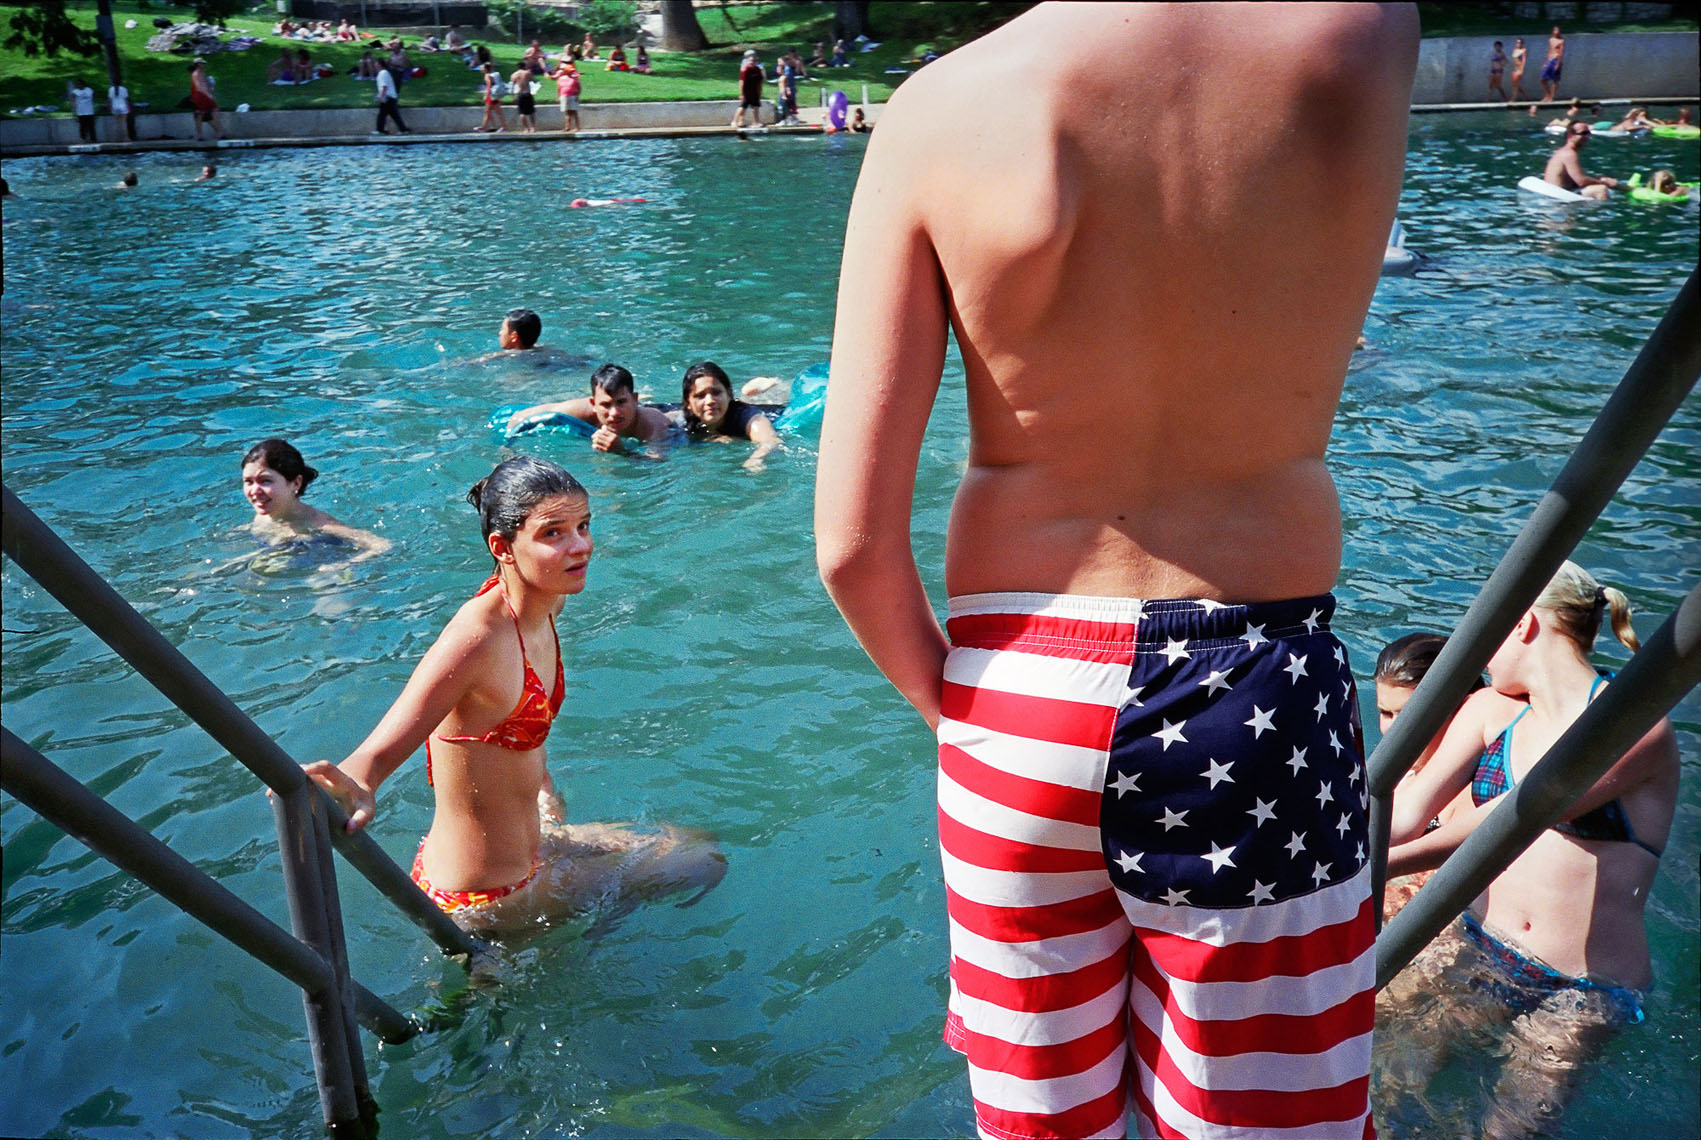 1157Barton Springs, Spring fed pool, Stars and stripes shorts